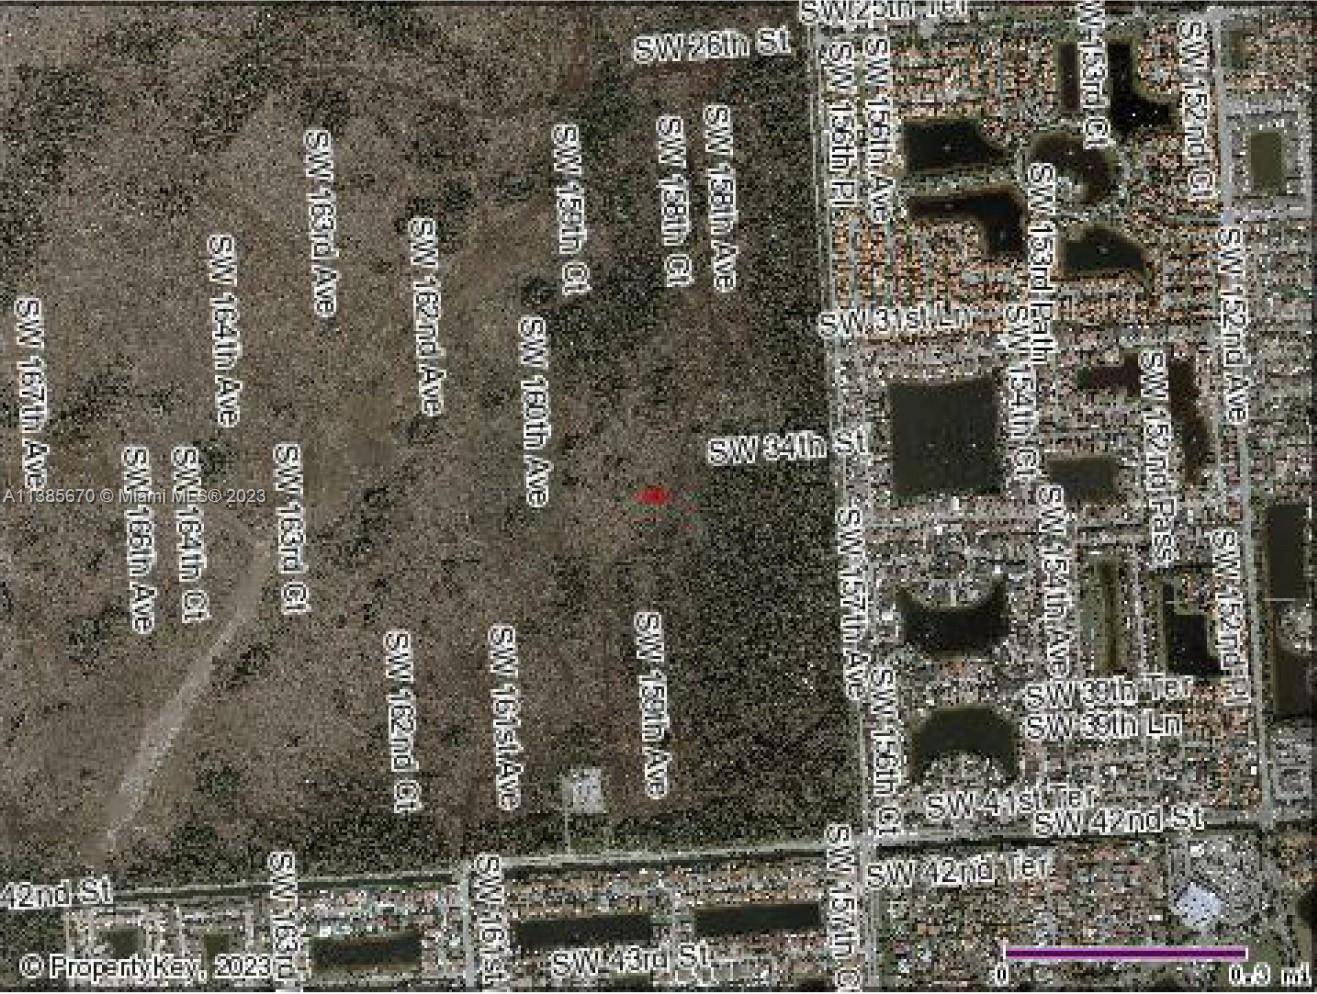 GREAT OPORTUNITY TO OWN LAND IN THE UPCOMING SOUTHWEST KENDALL AREA LOCATED VERY CLOSE TO MANY EXISTING RESIDENTIAL COMMUNITES, SCHOOLS, SHOPPING CENTERS AND CHURCHES.